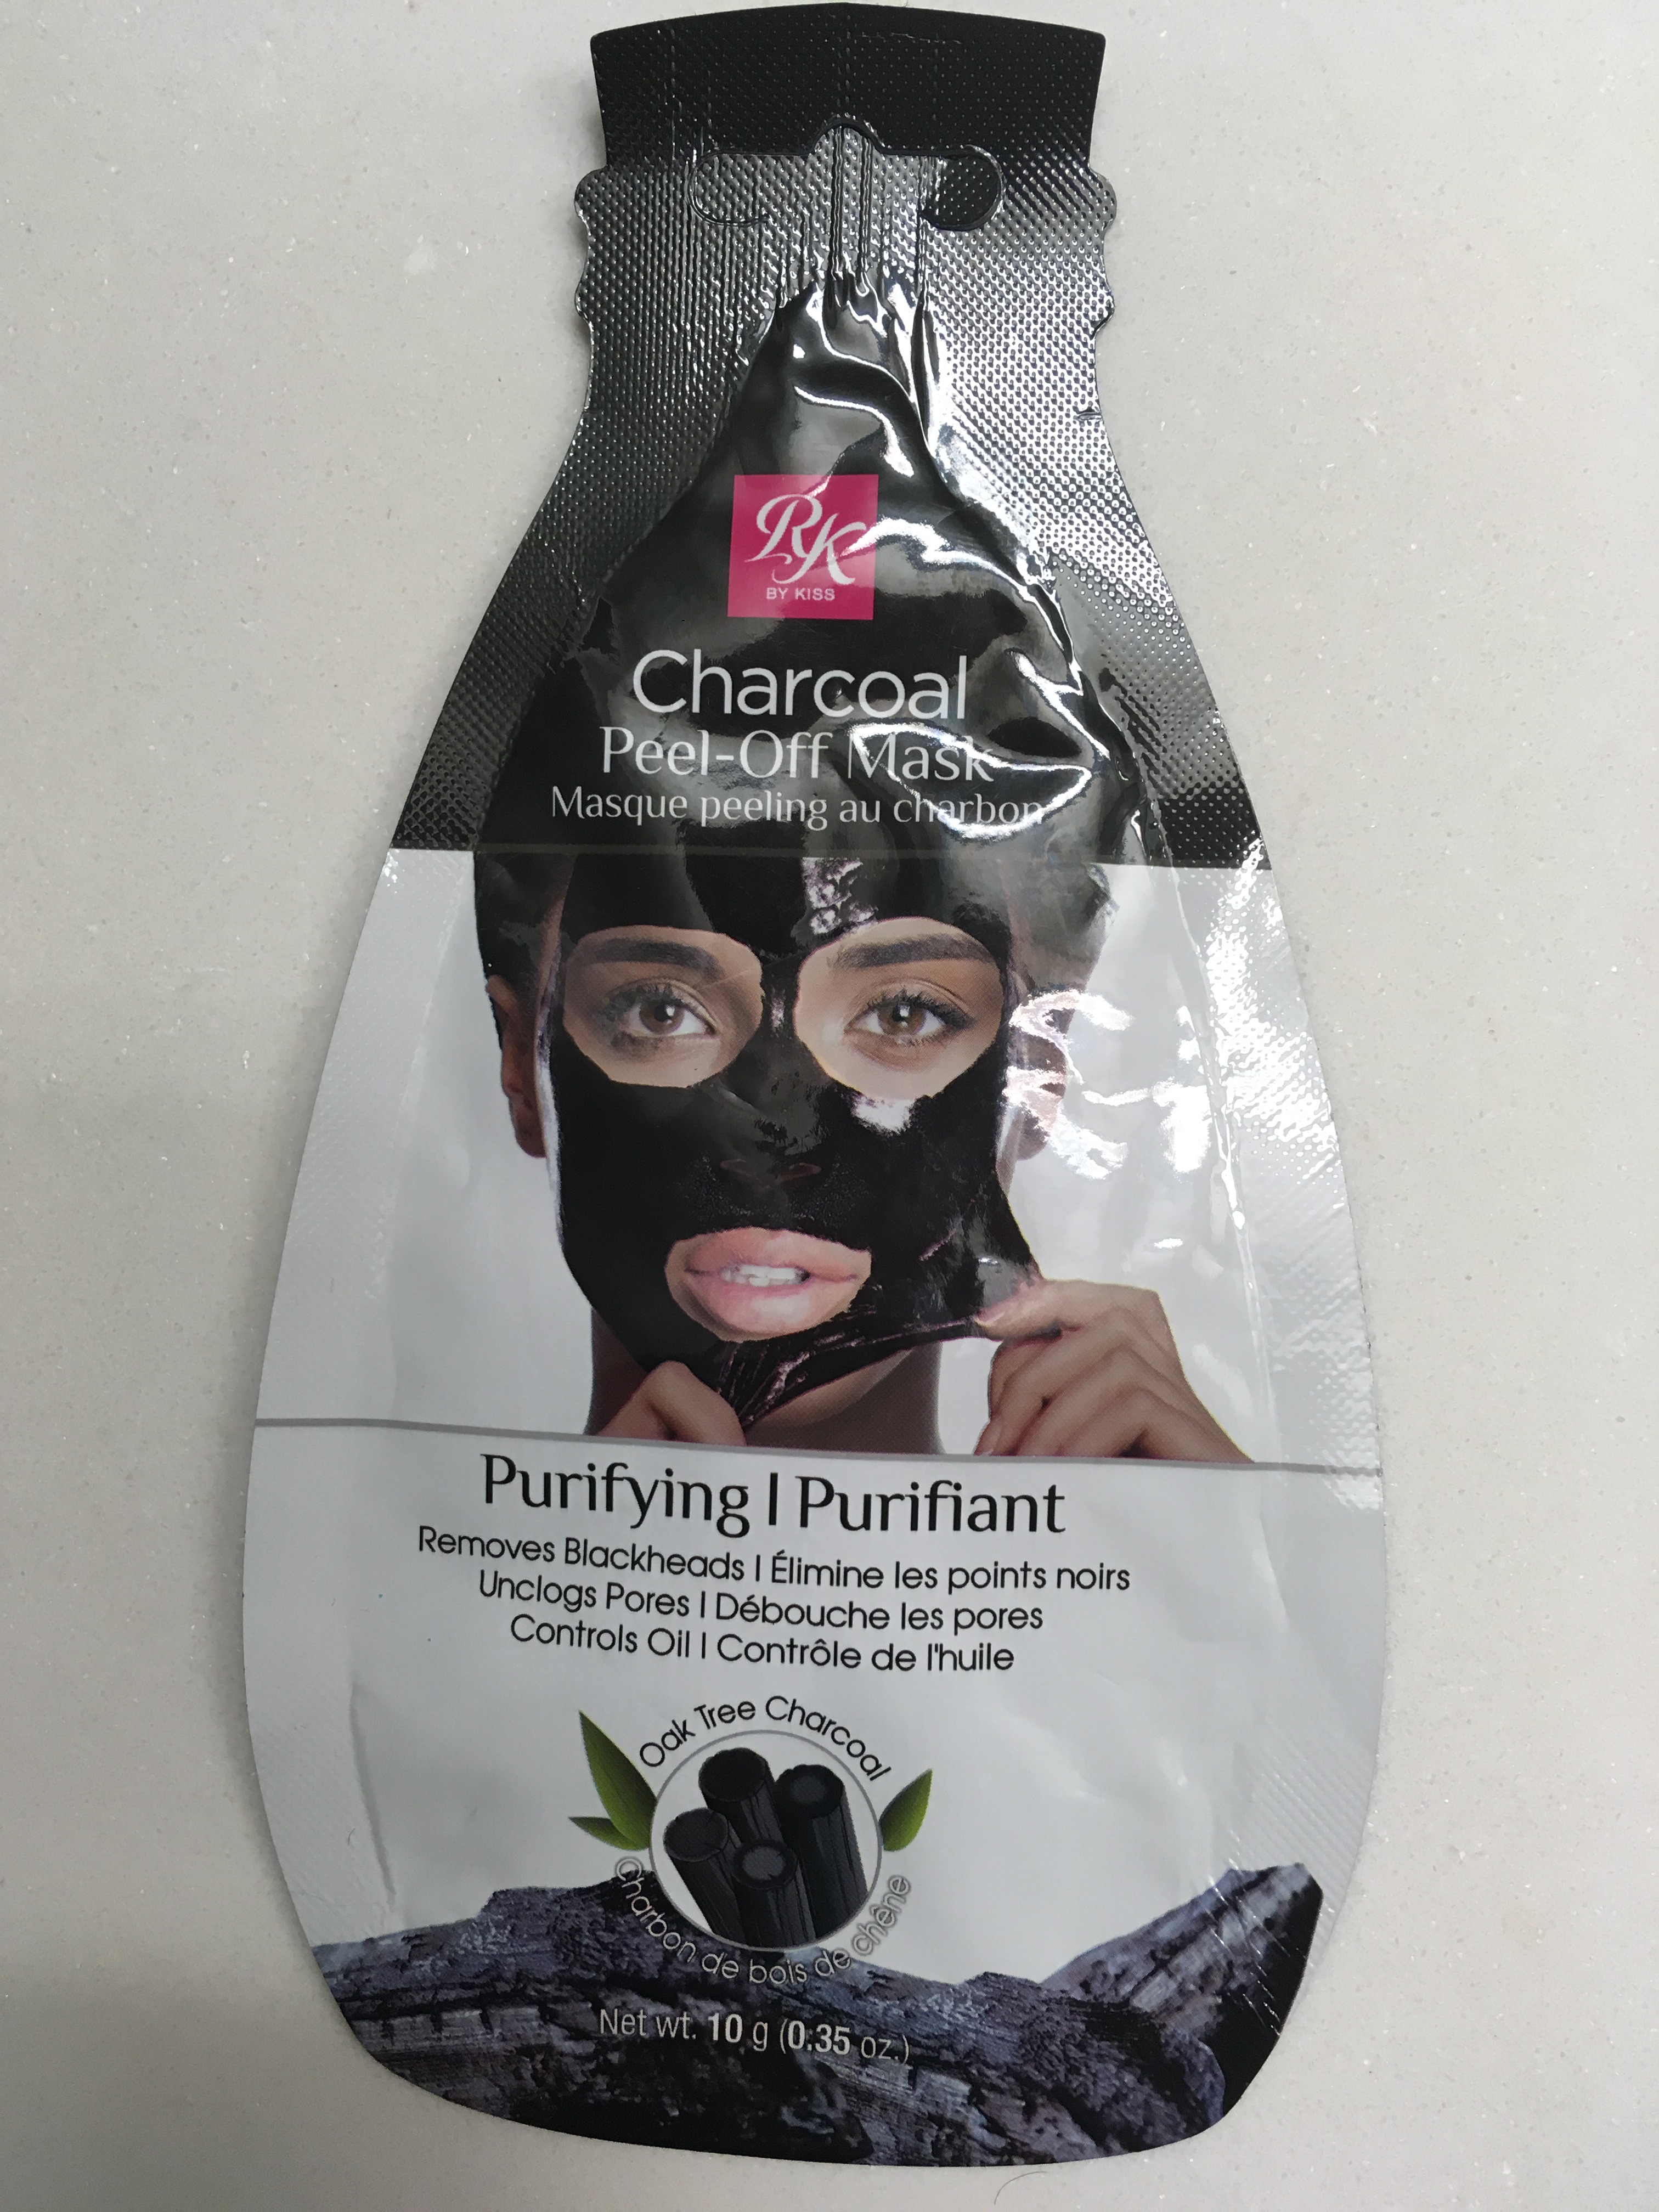 Ruby Kiss Charcoal Peel Off Mask Review pic